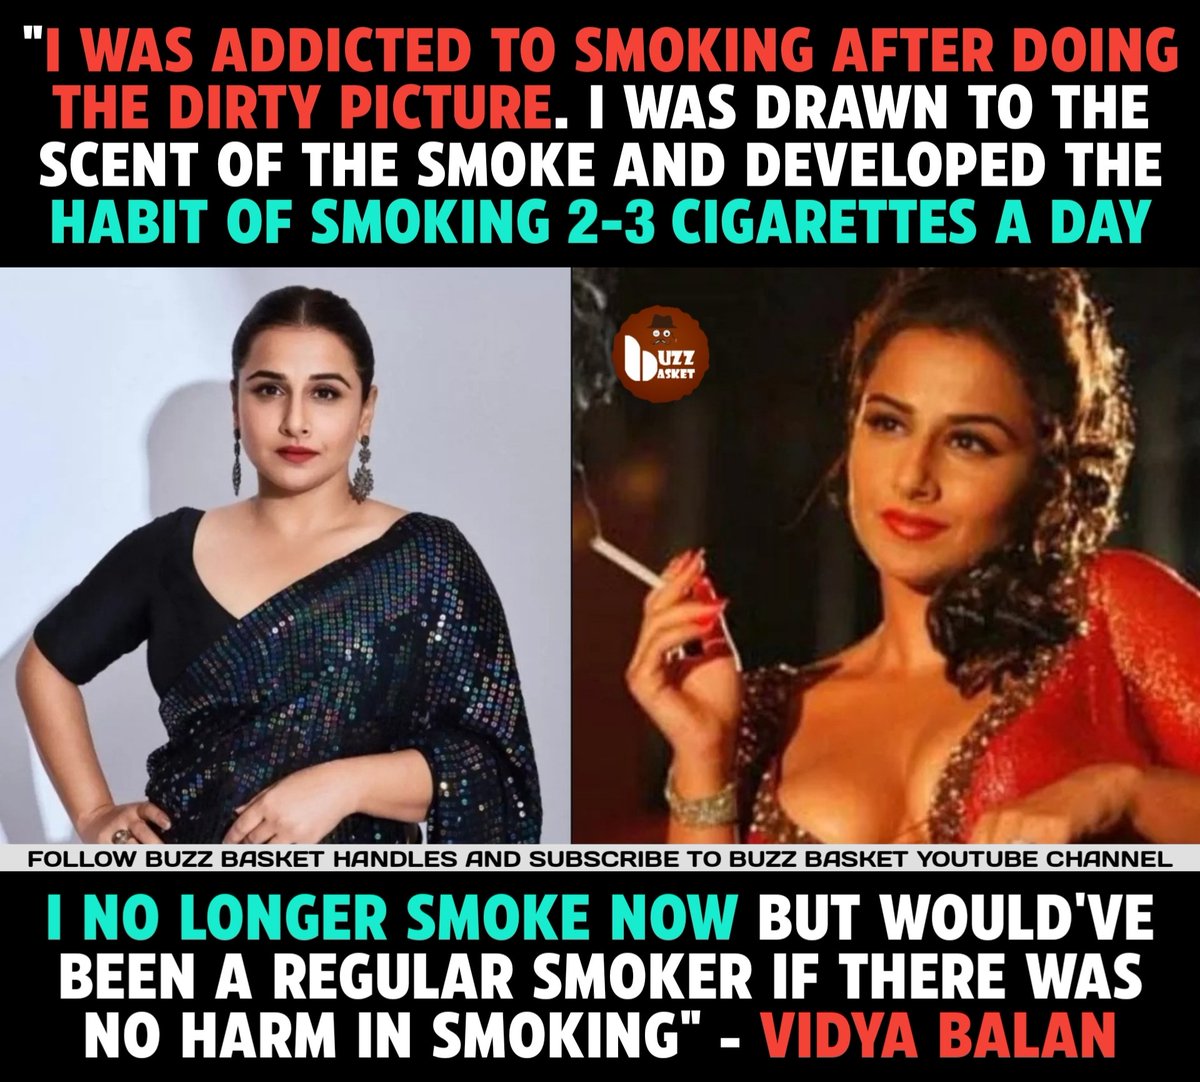 I developed the habit of smoking 2-3 cigarettes a day - #VidyaBalan

#TheDirtyPicture #DoAurDoPyaar #Bollywood #BollywoodActress